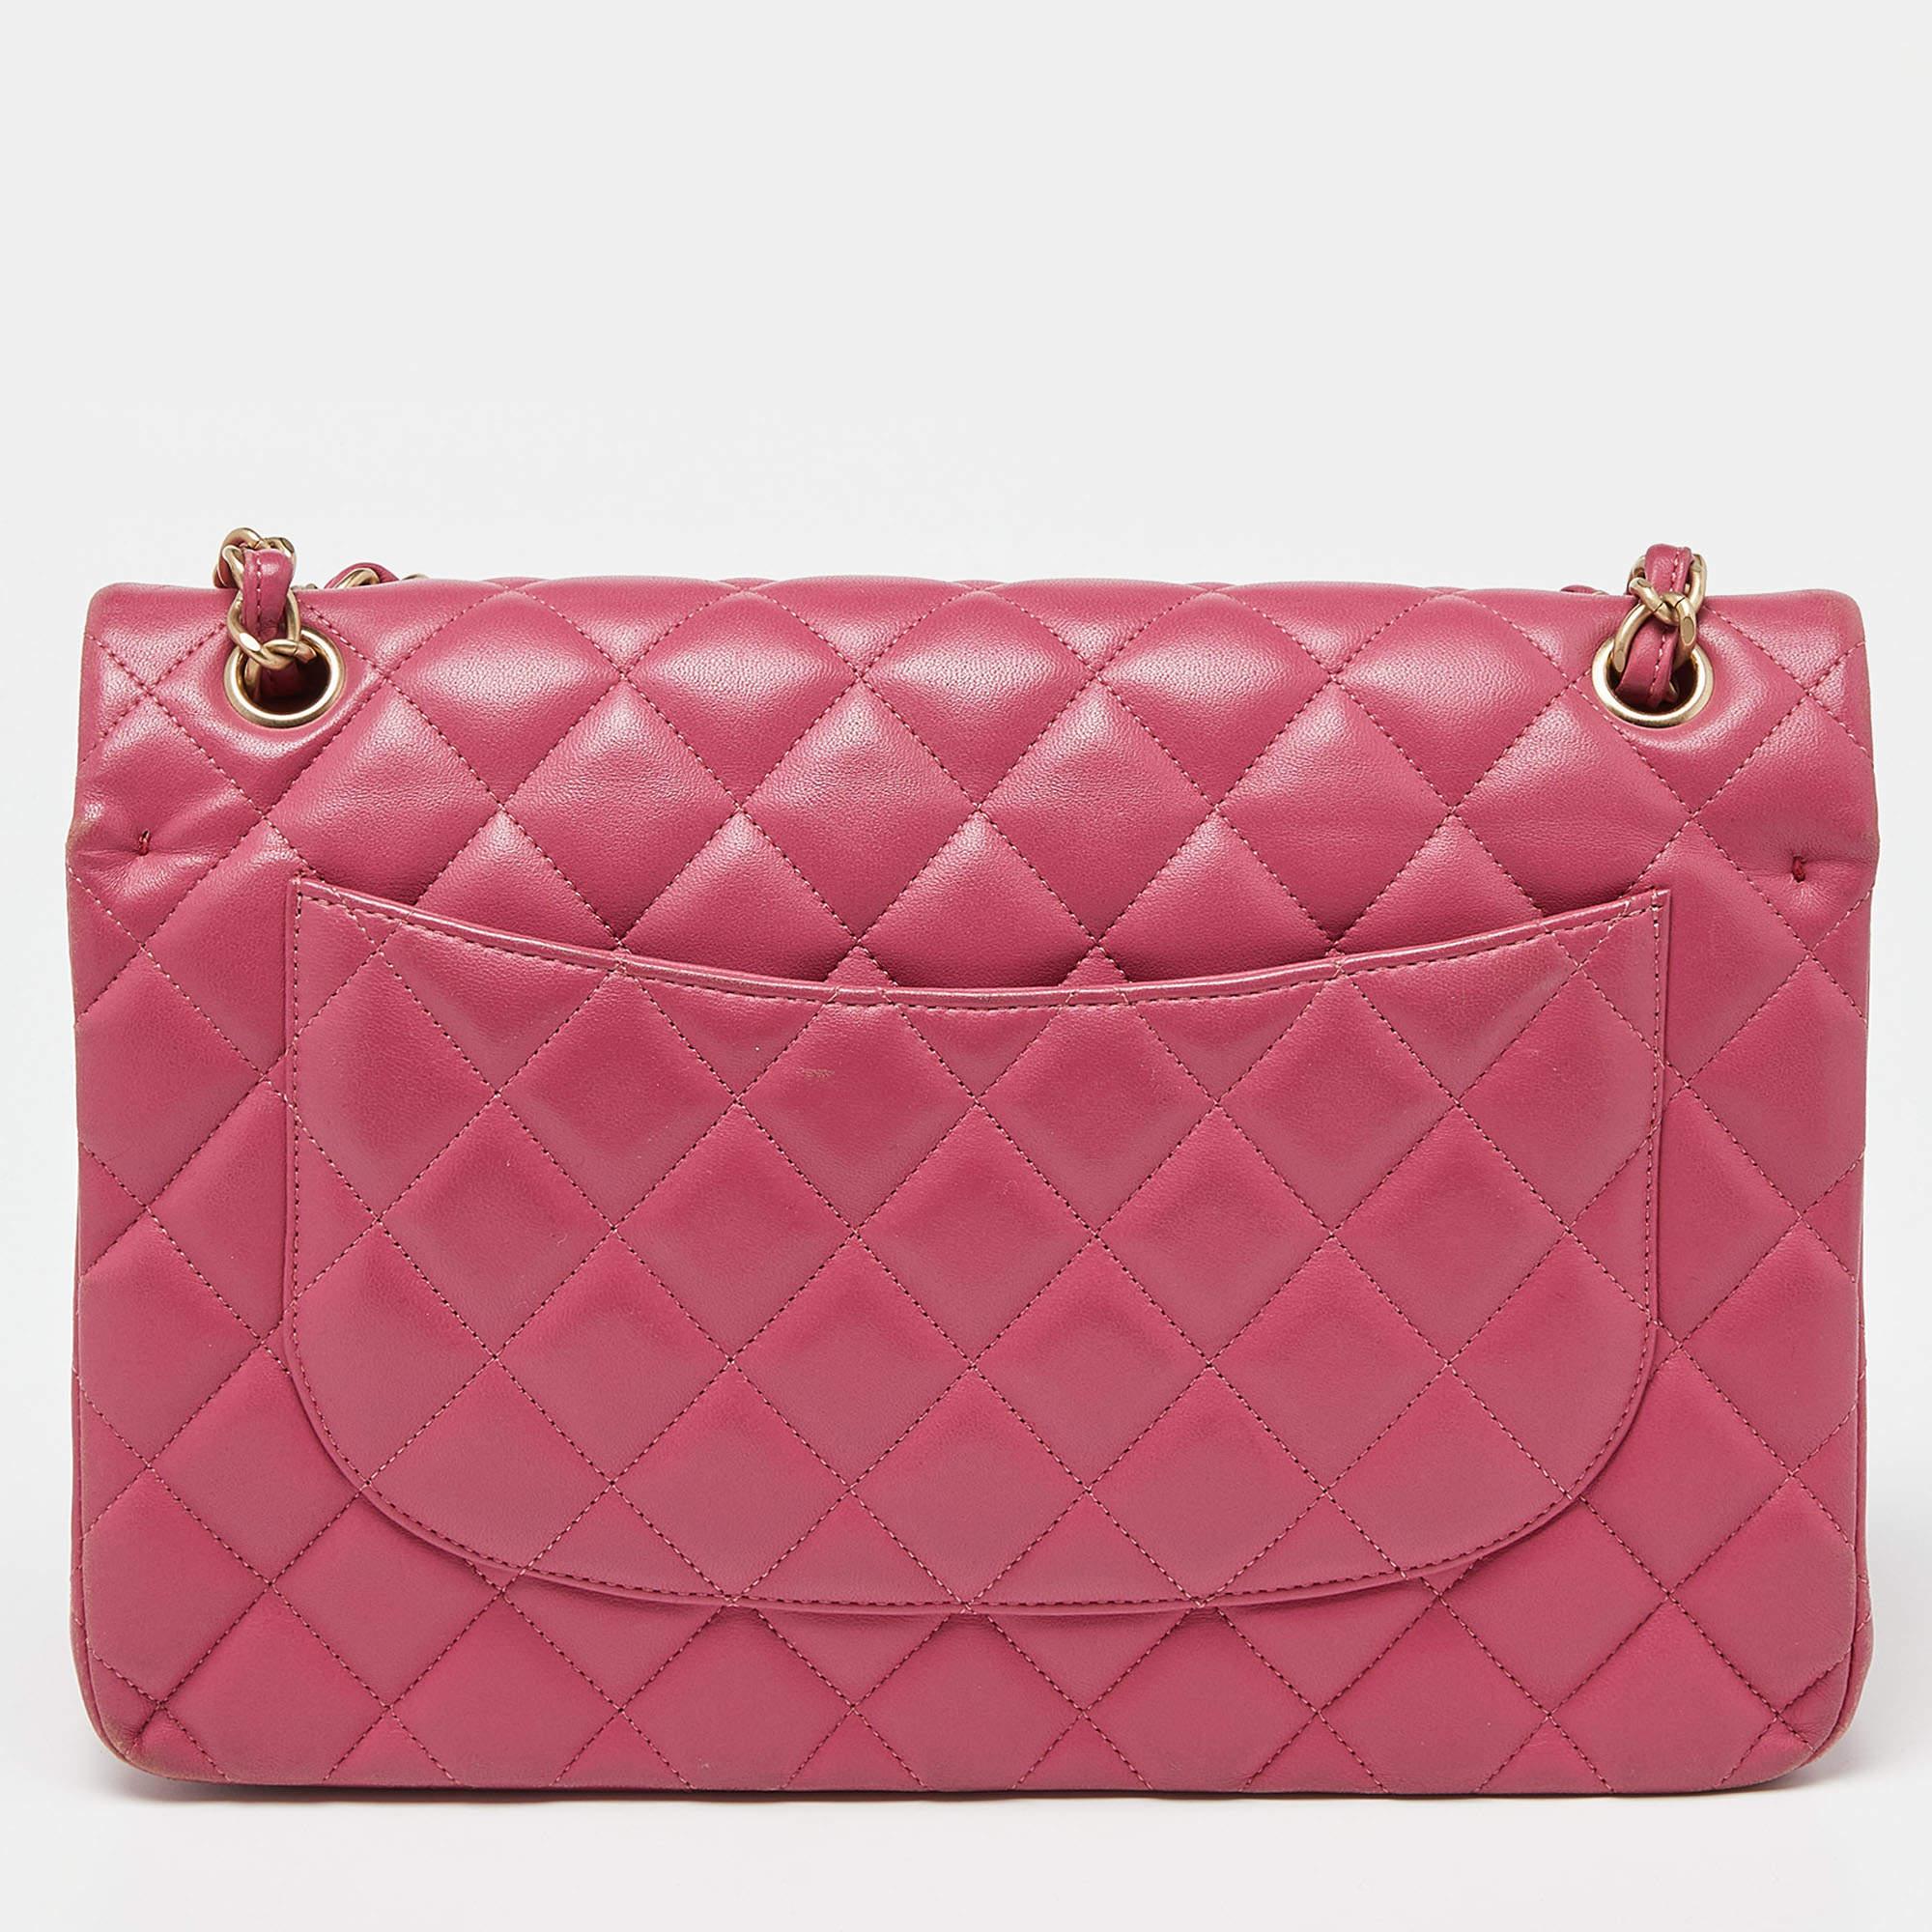 Chanel Pink Quilted Leather Jumbo Classic Double Flap Bag For Sale 2